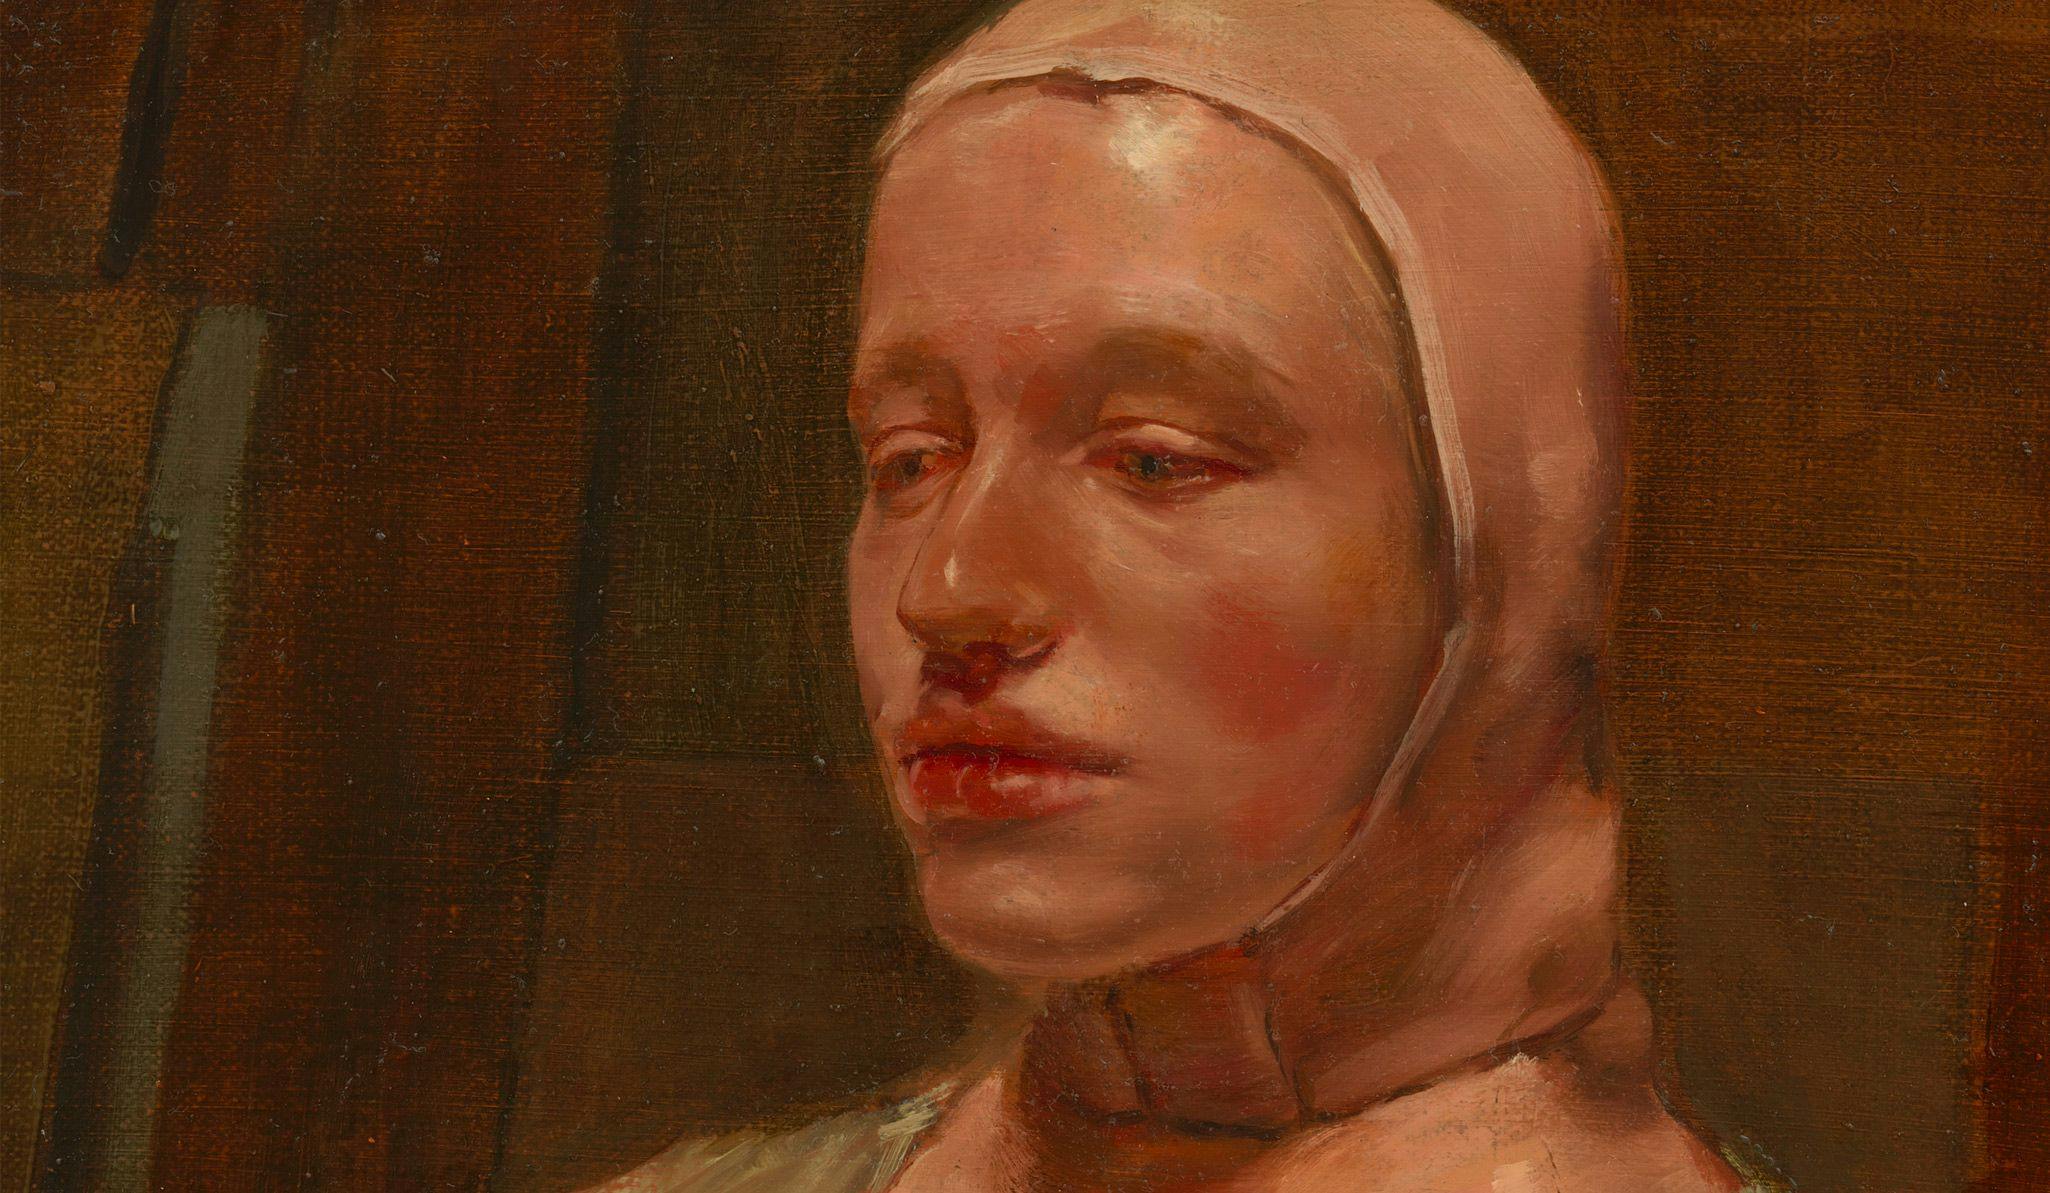 A detail of a painting by Michaël Borremans  titled The Double, dated 2022